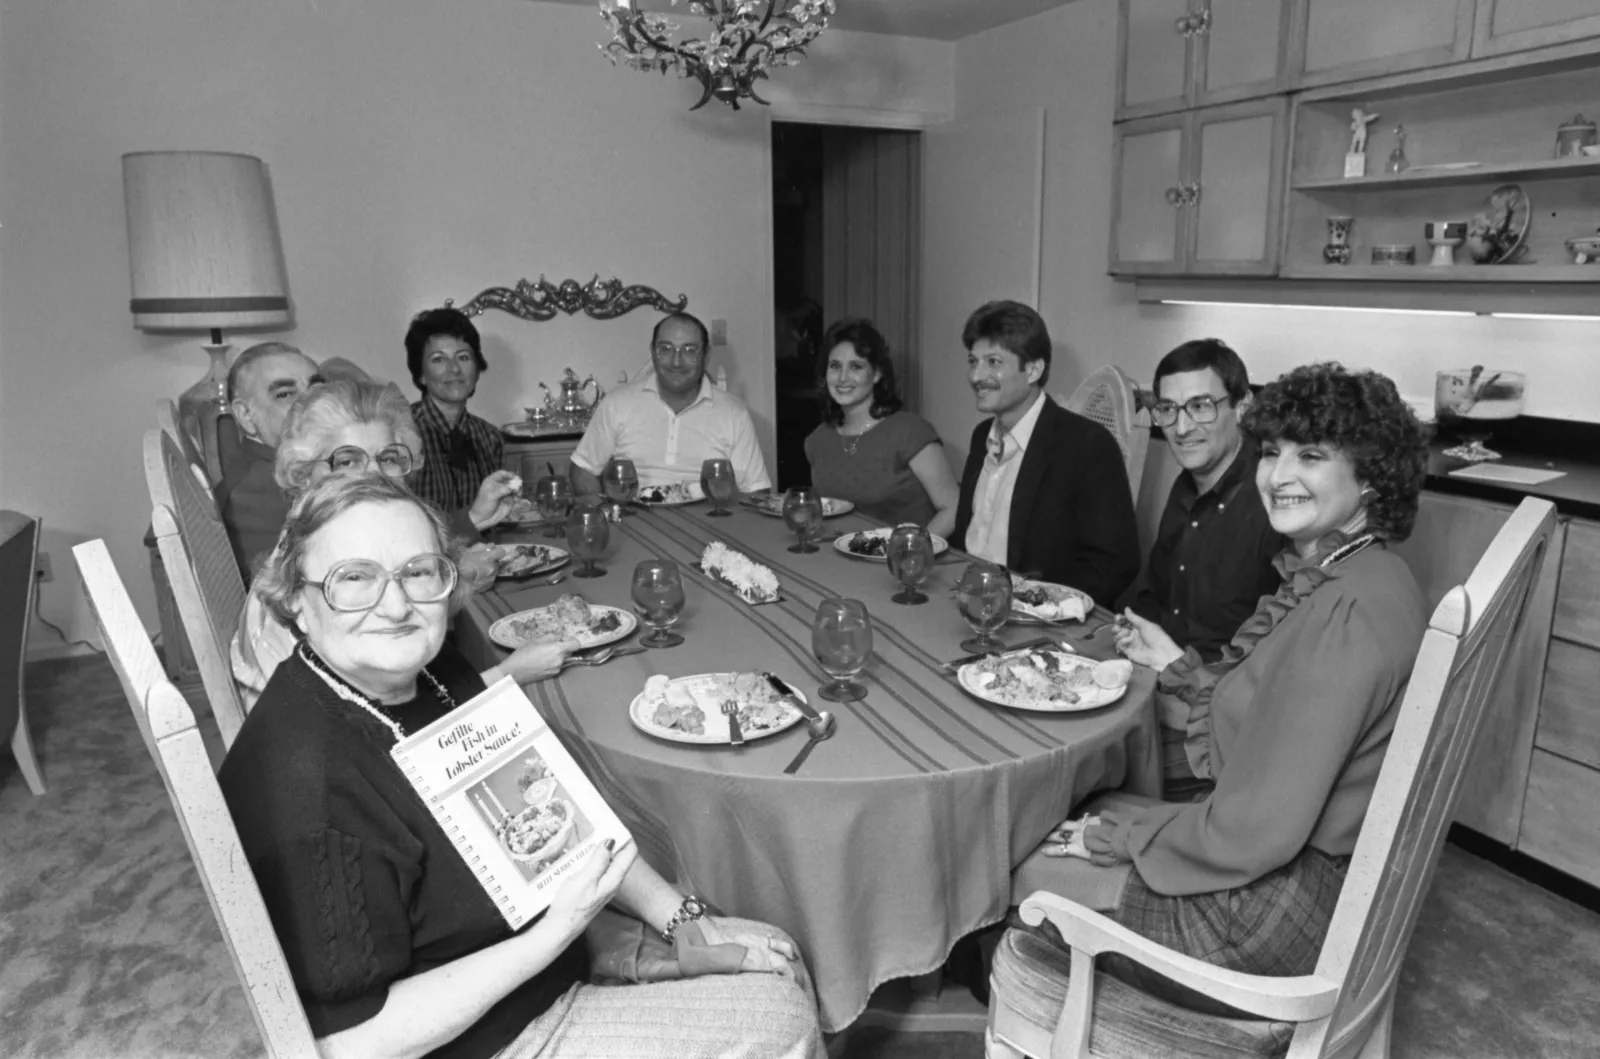 Image of Belle Serbin Fields and family with cookbook.